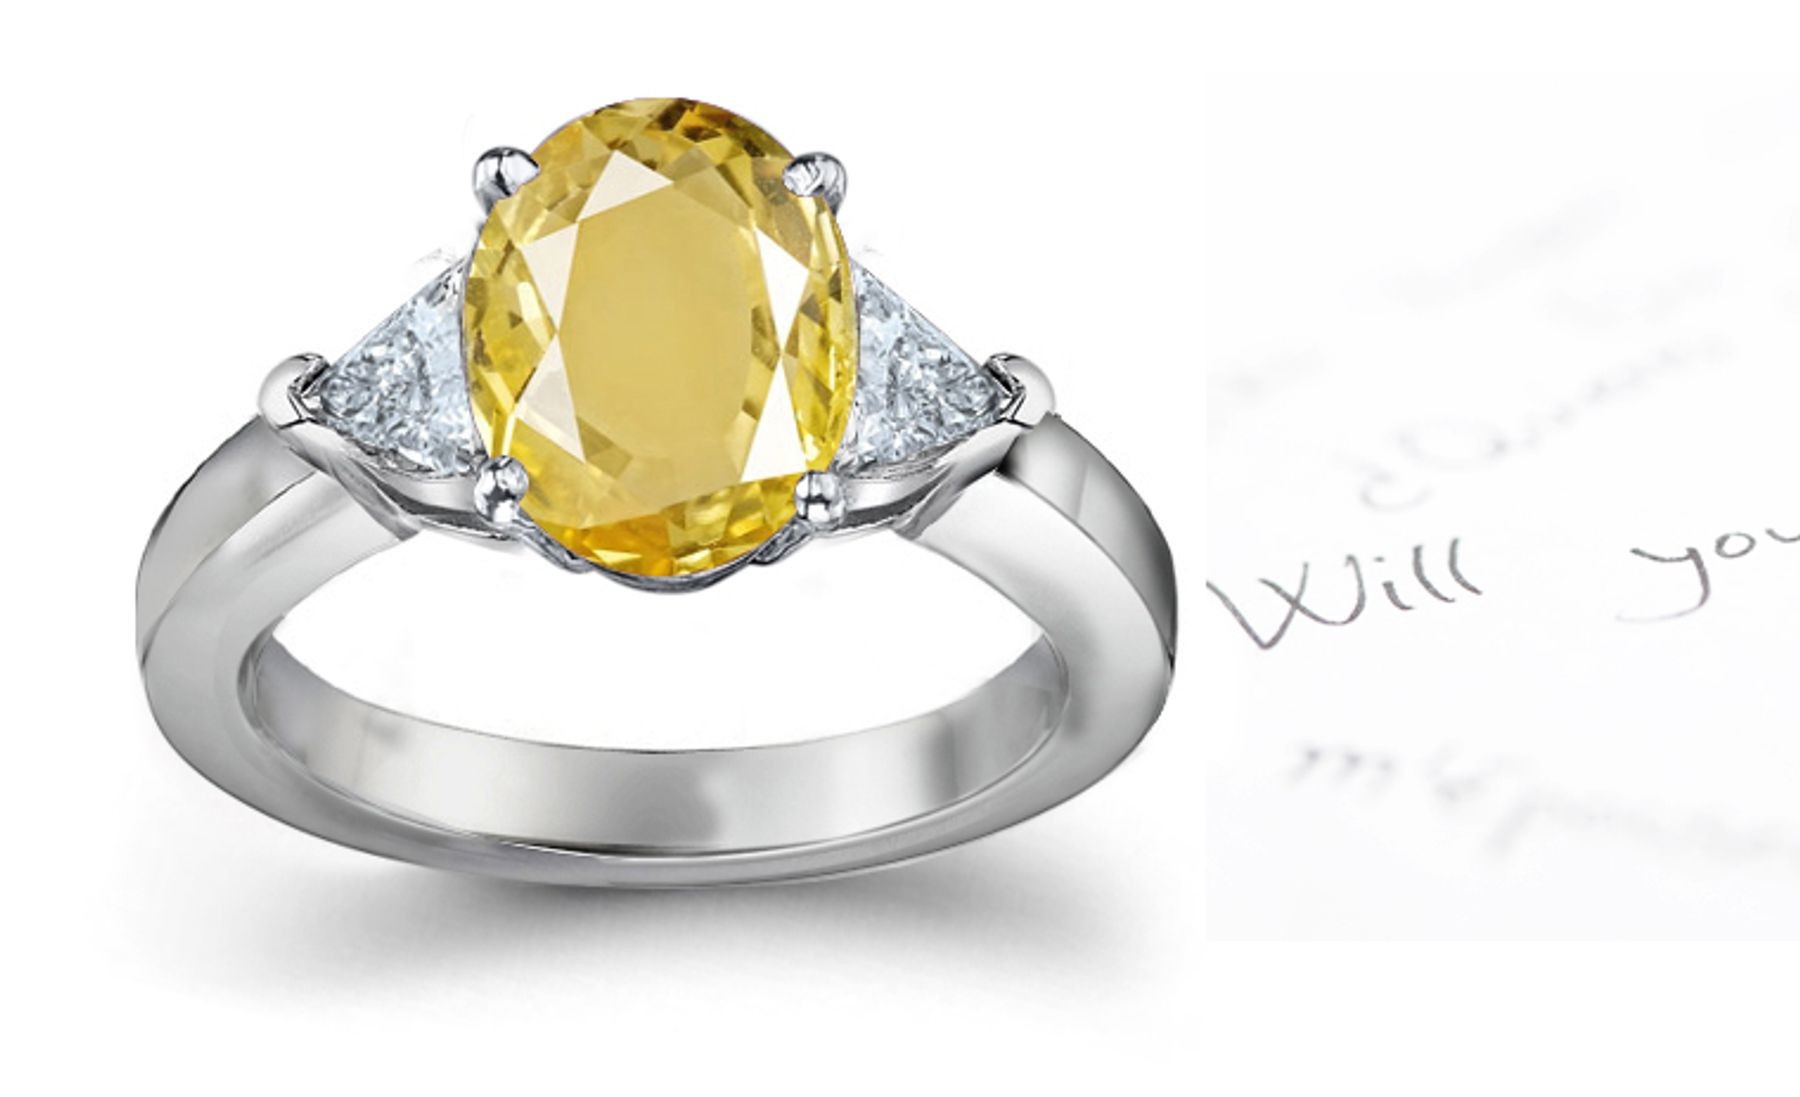 Trillion Yellow Sapphire 3 Stone Engagement Ring with Emerald-Cut Diamonds in Gold